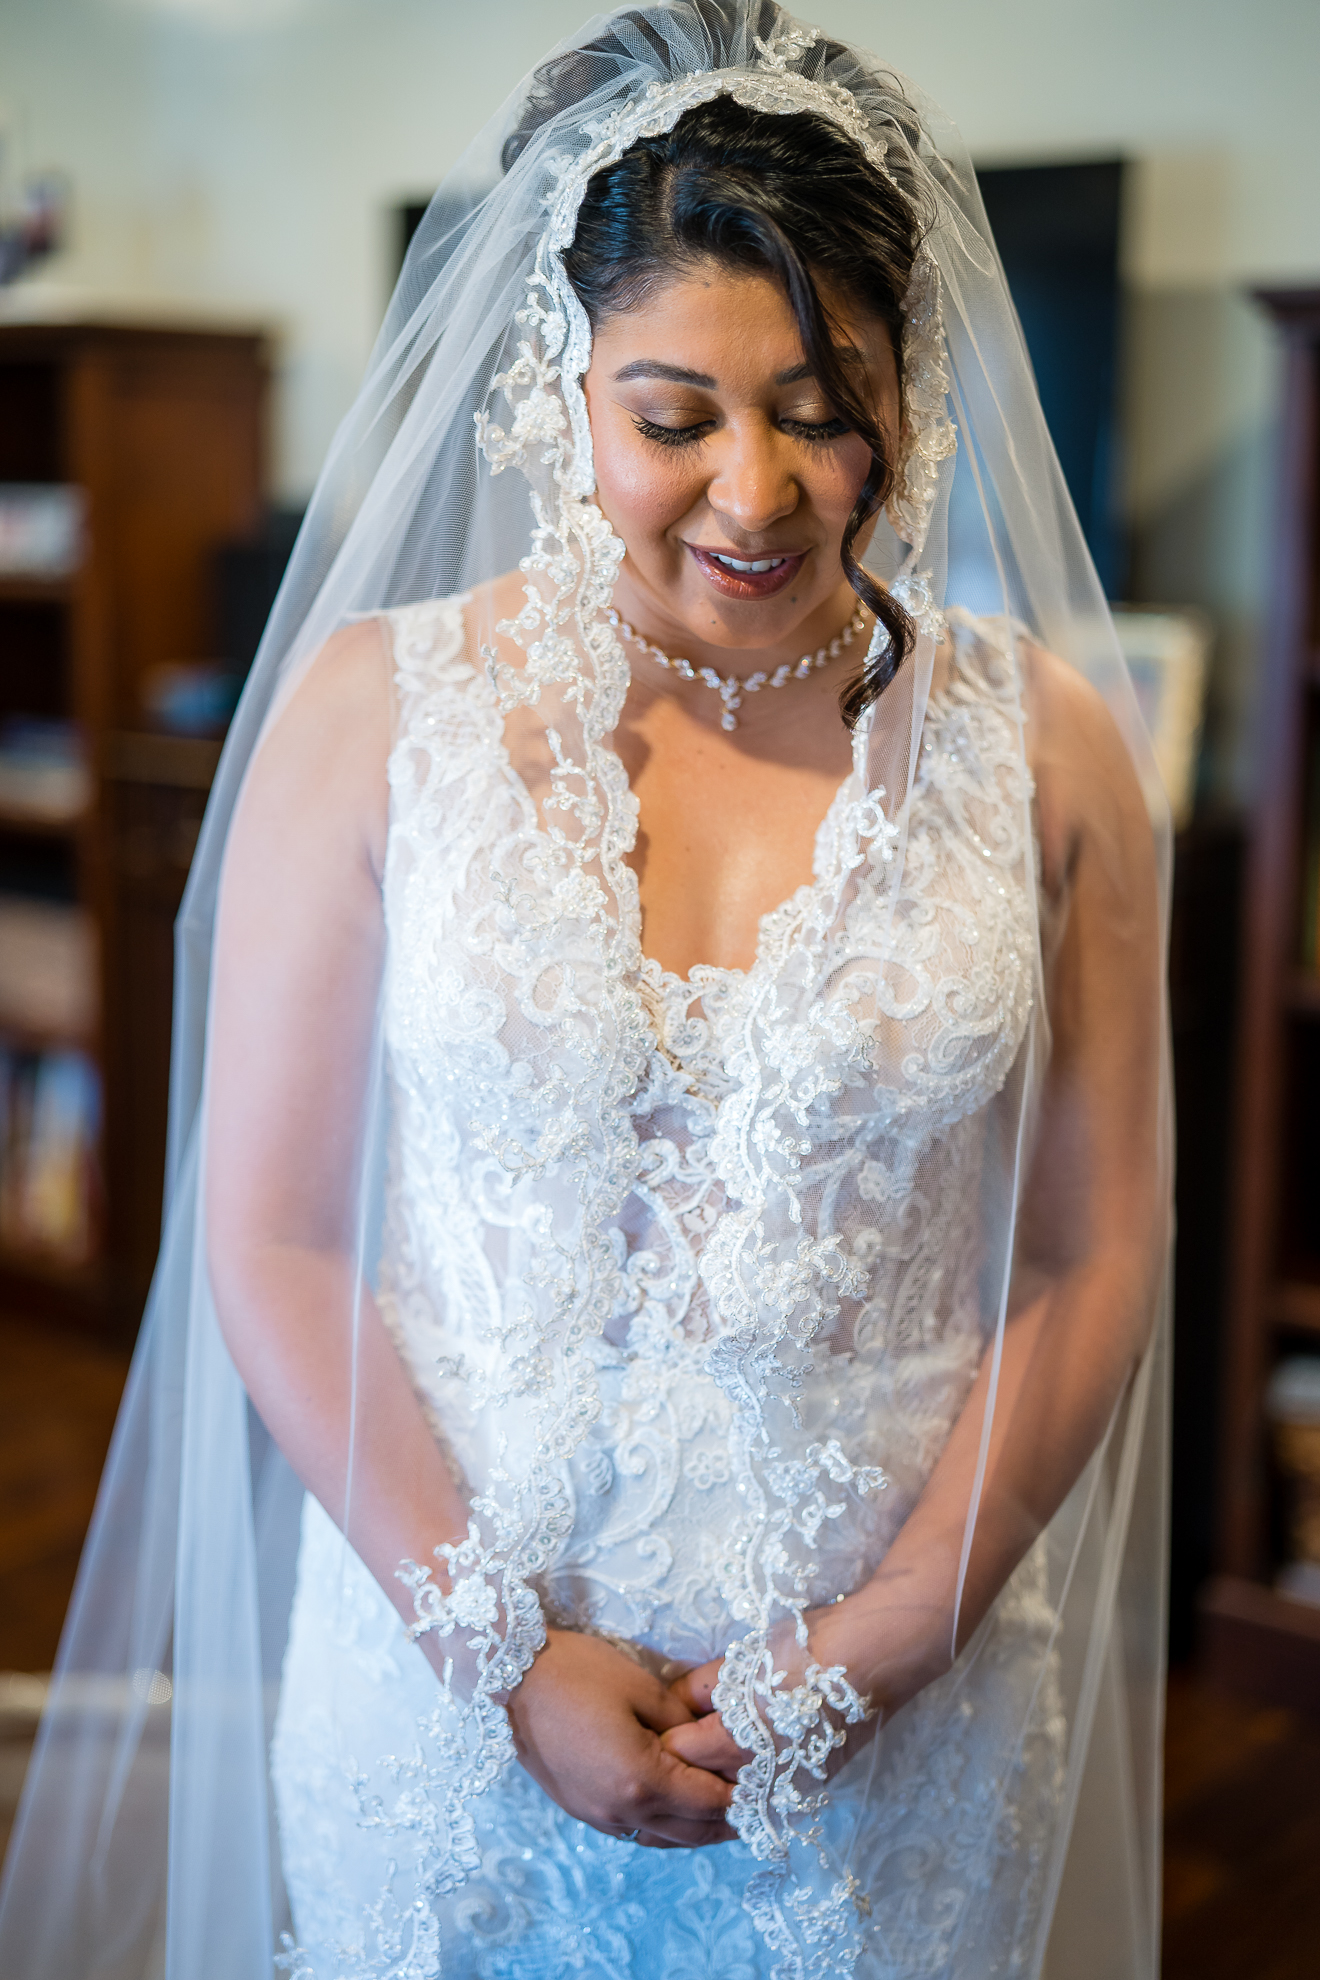 ThomasKim_photography A bride puts on her S veil, smiling A.